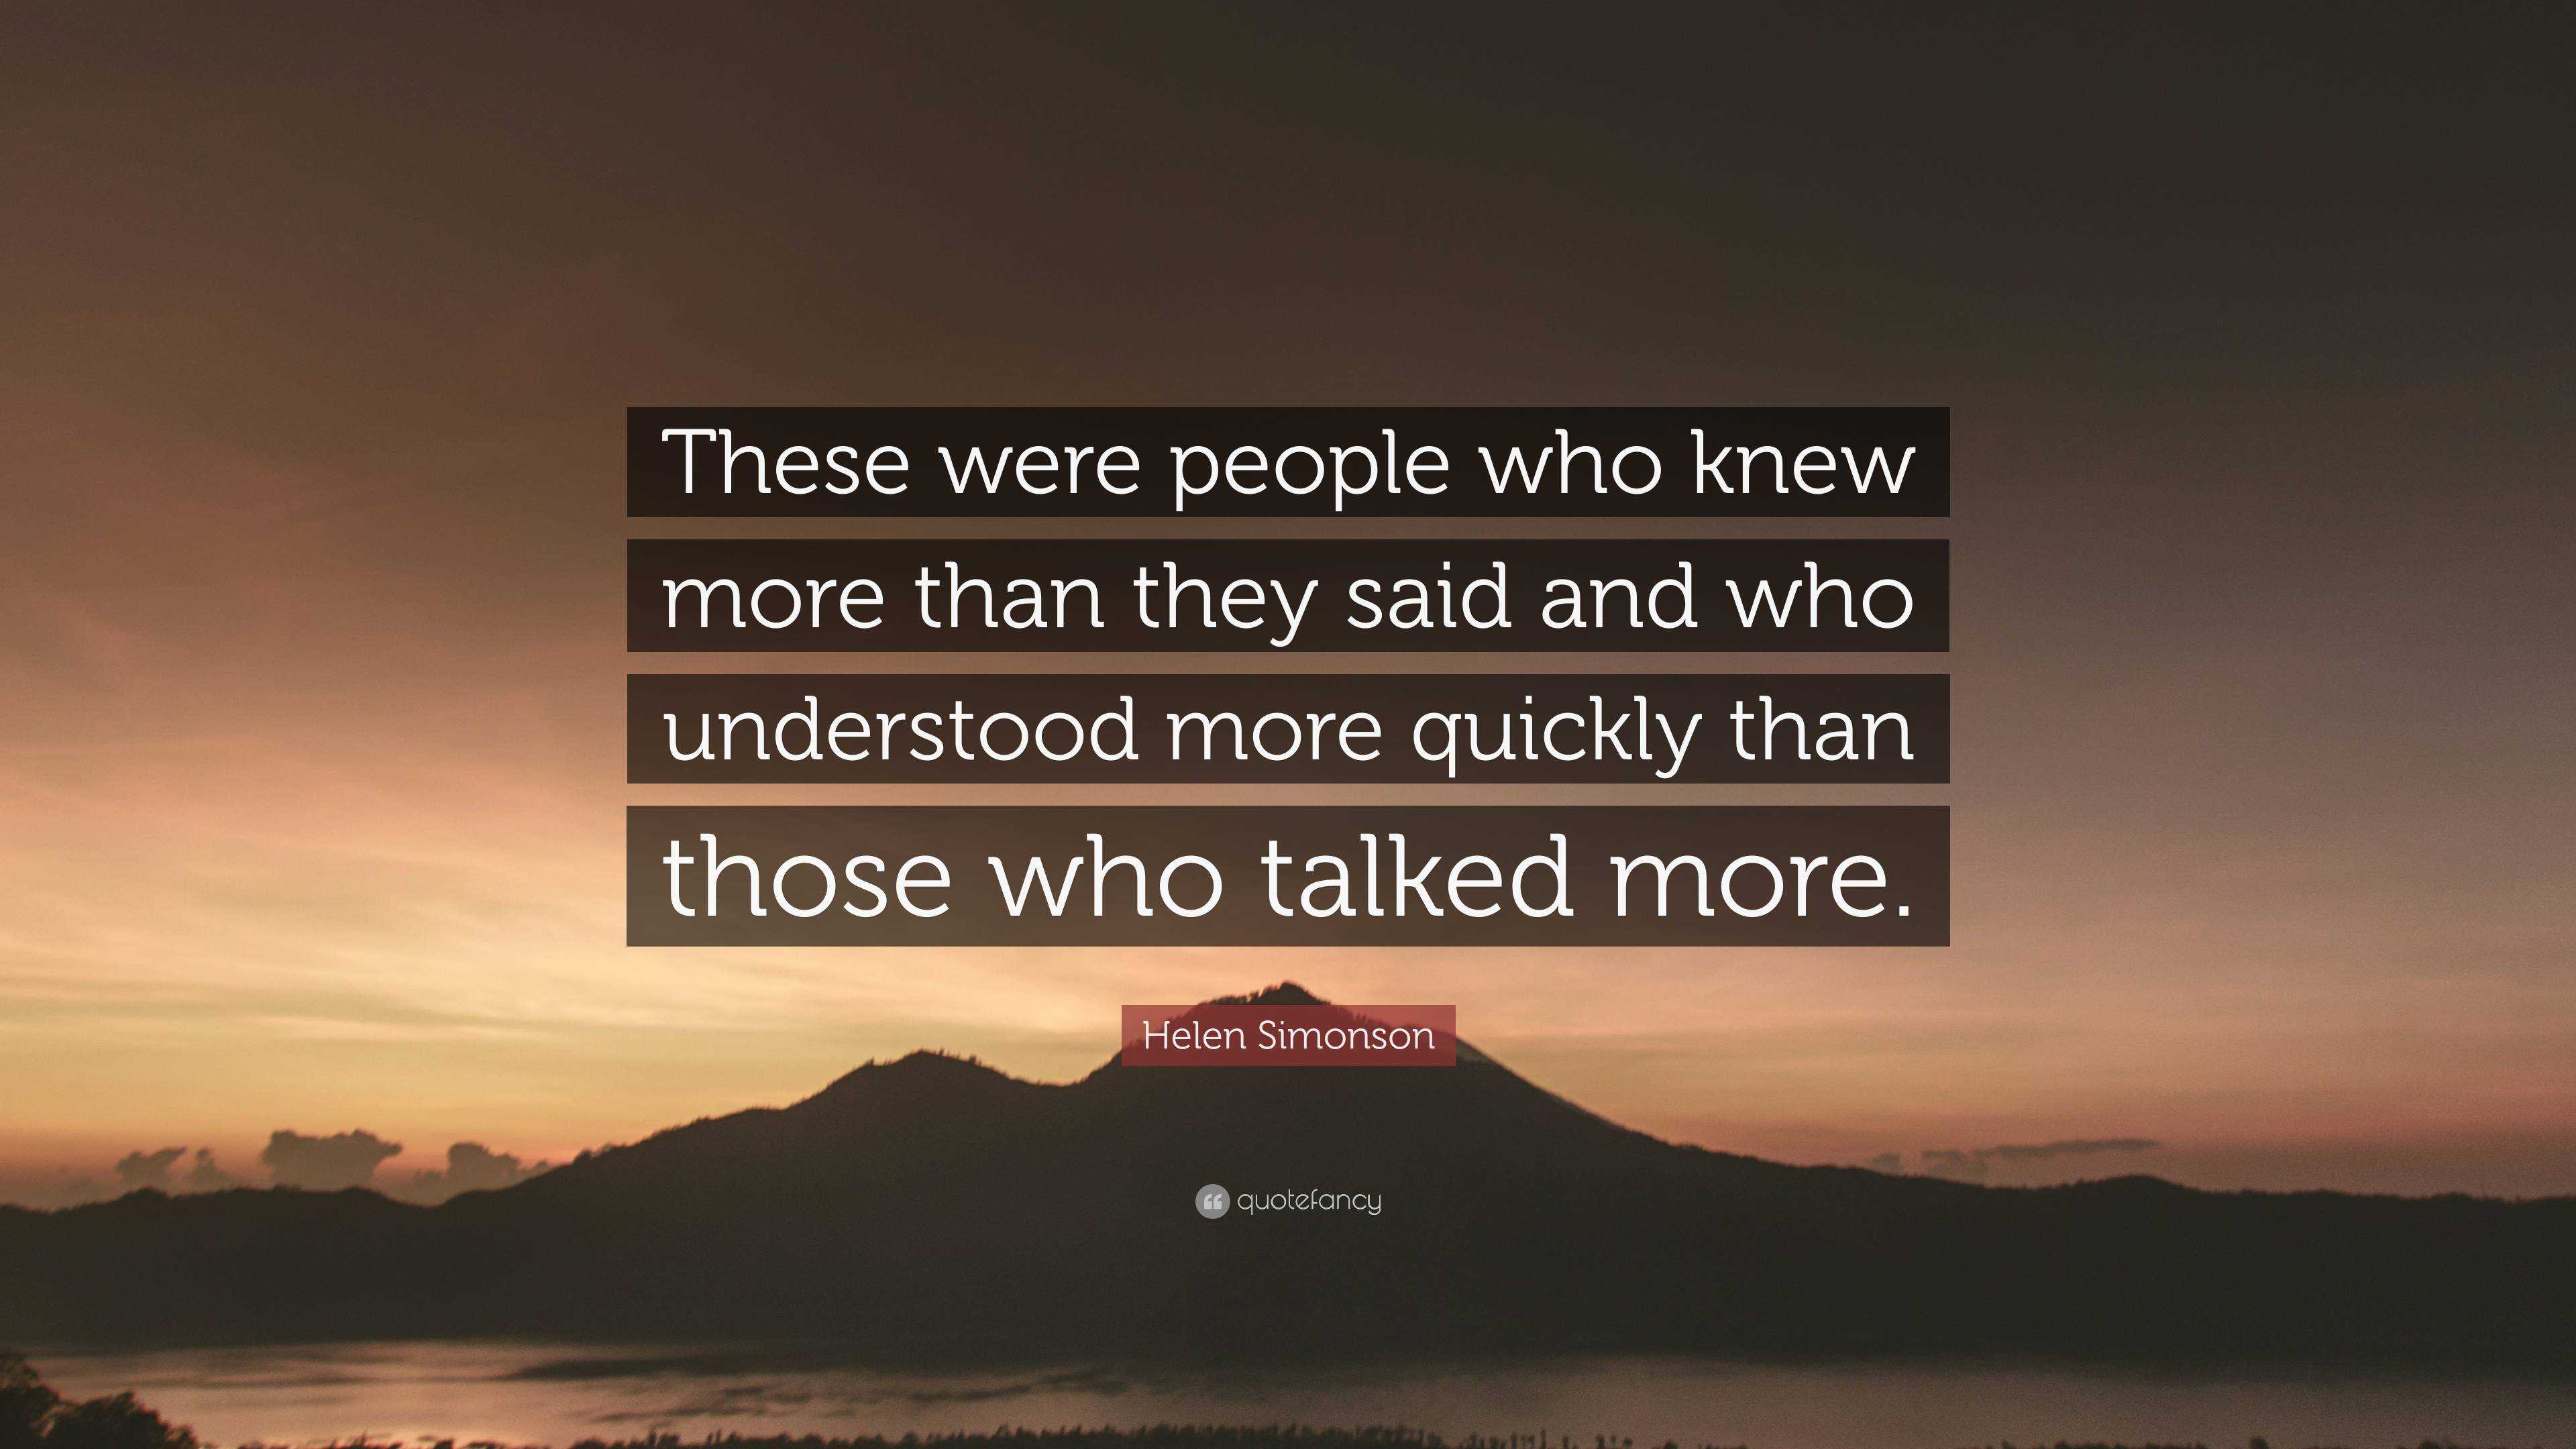 Helen Simonson Quote: “These were people who knew more than they said ...